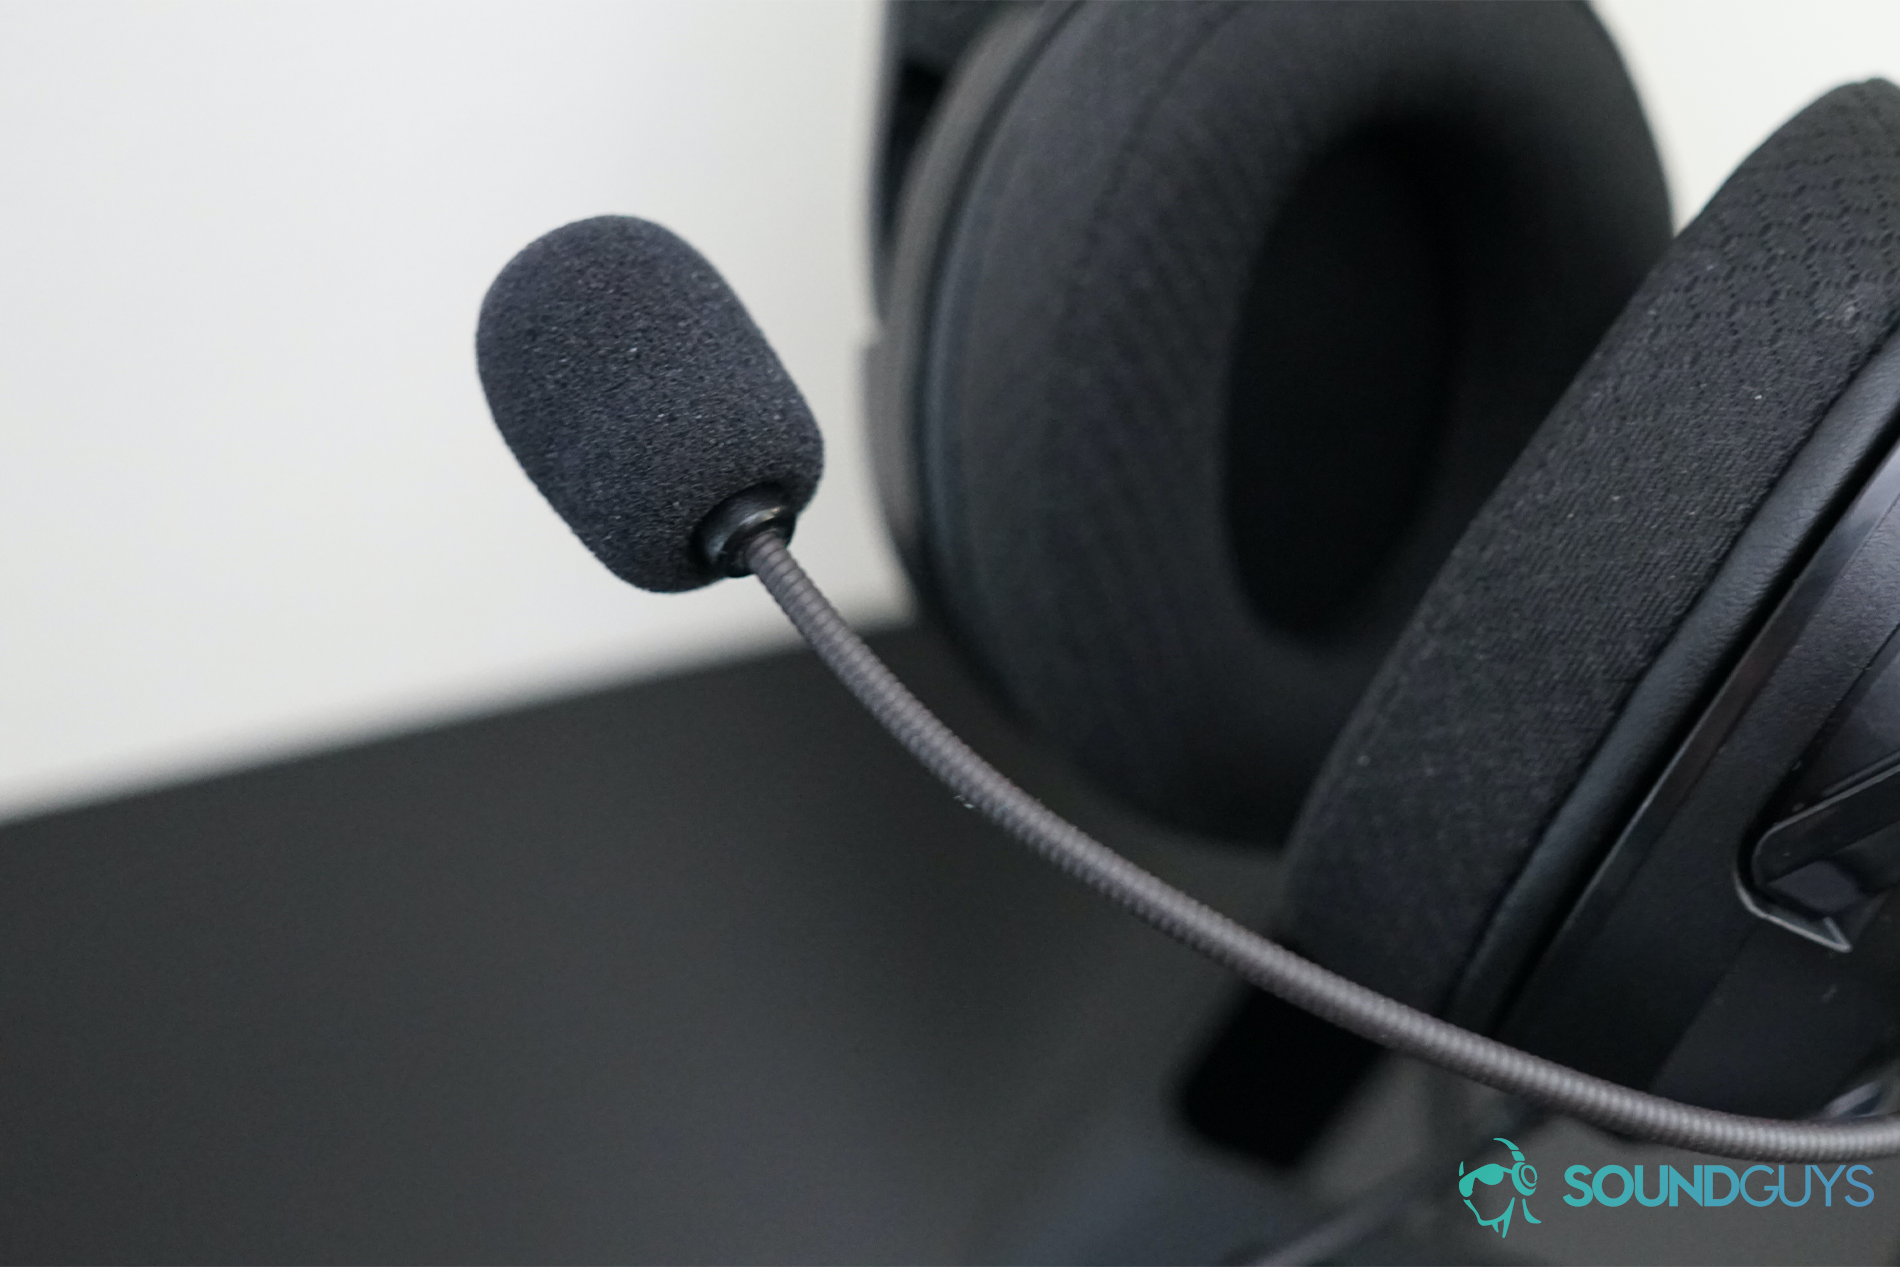 A close up shot of the microphone on the AmazonBasics Gaming Headset 